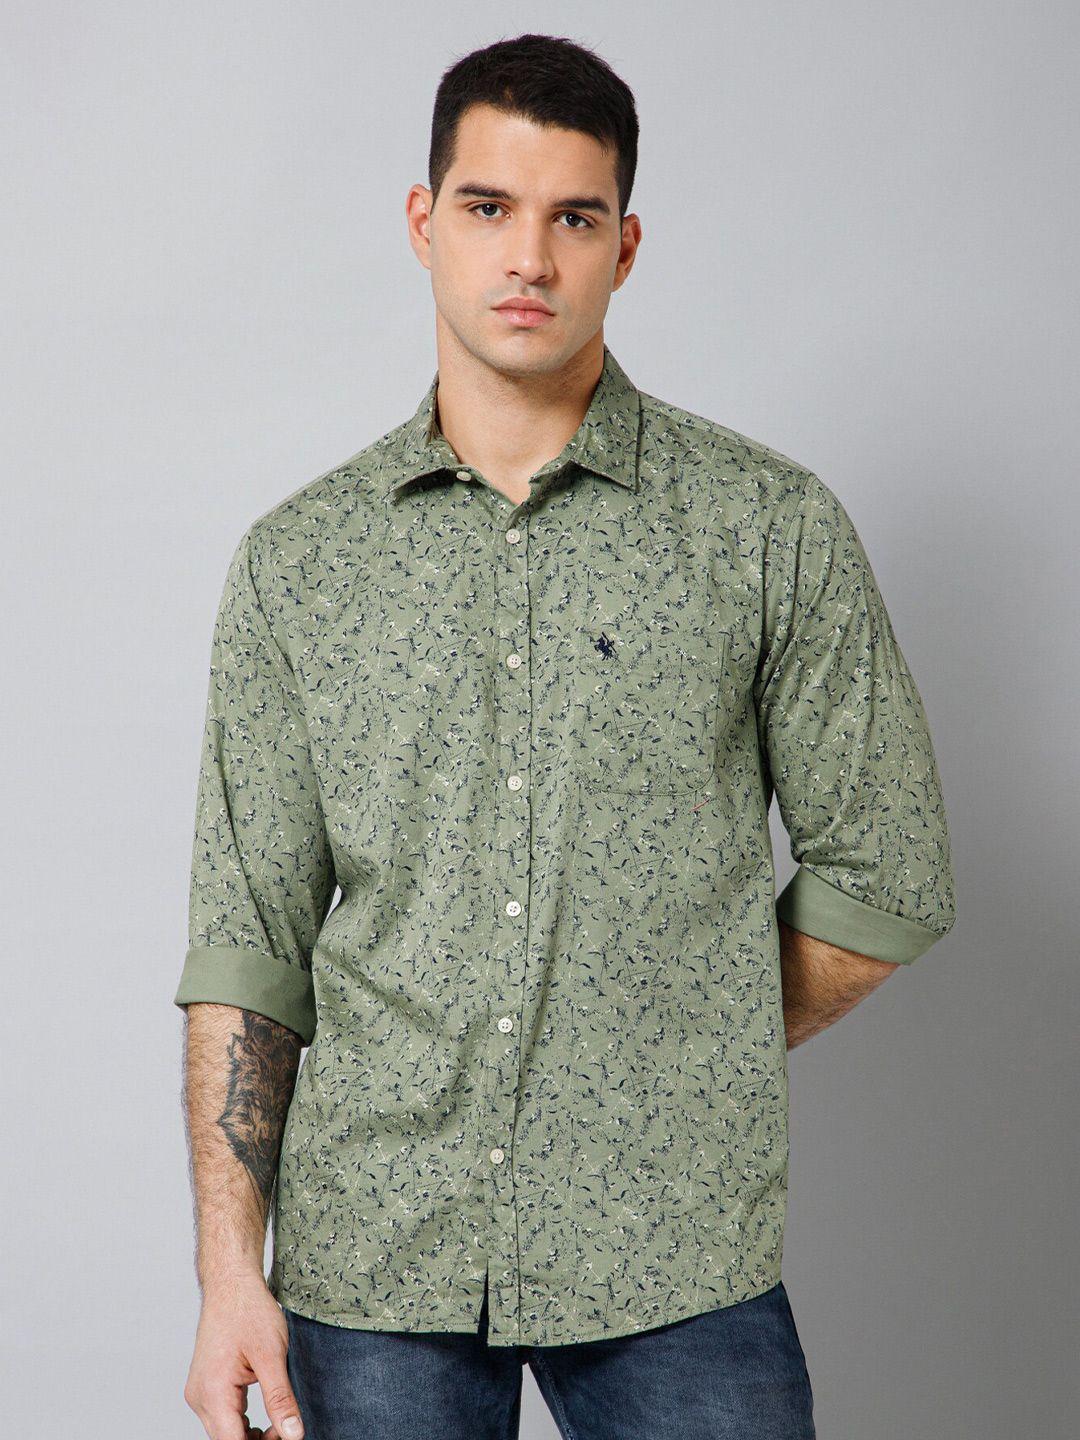 cantabil abstract printed comfort cotton casual shirt